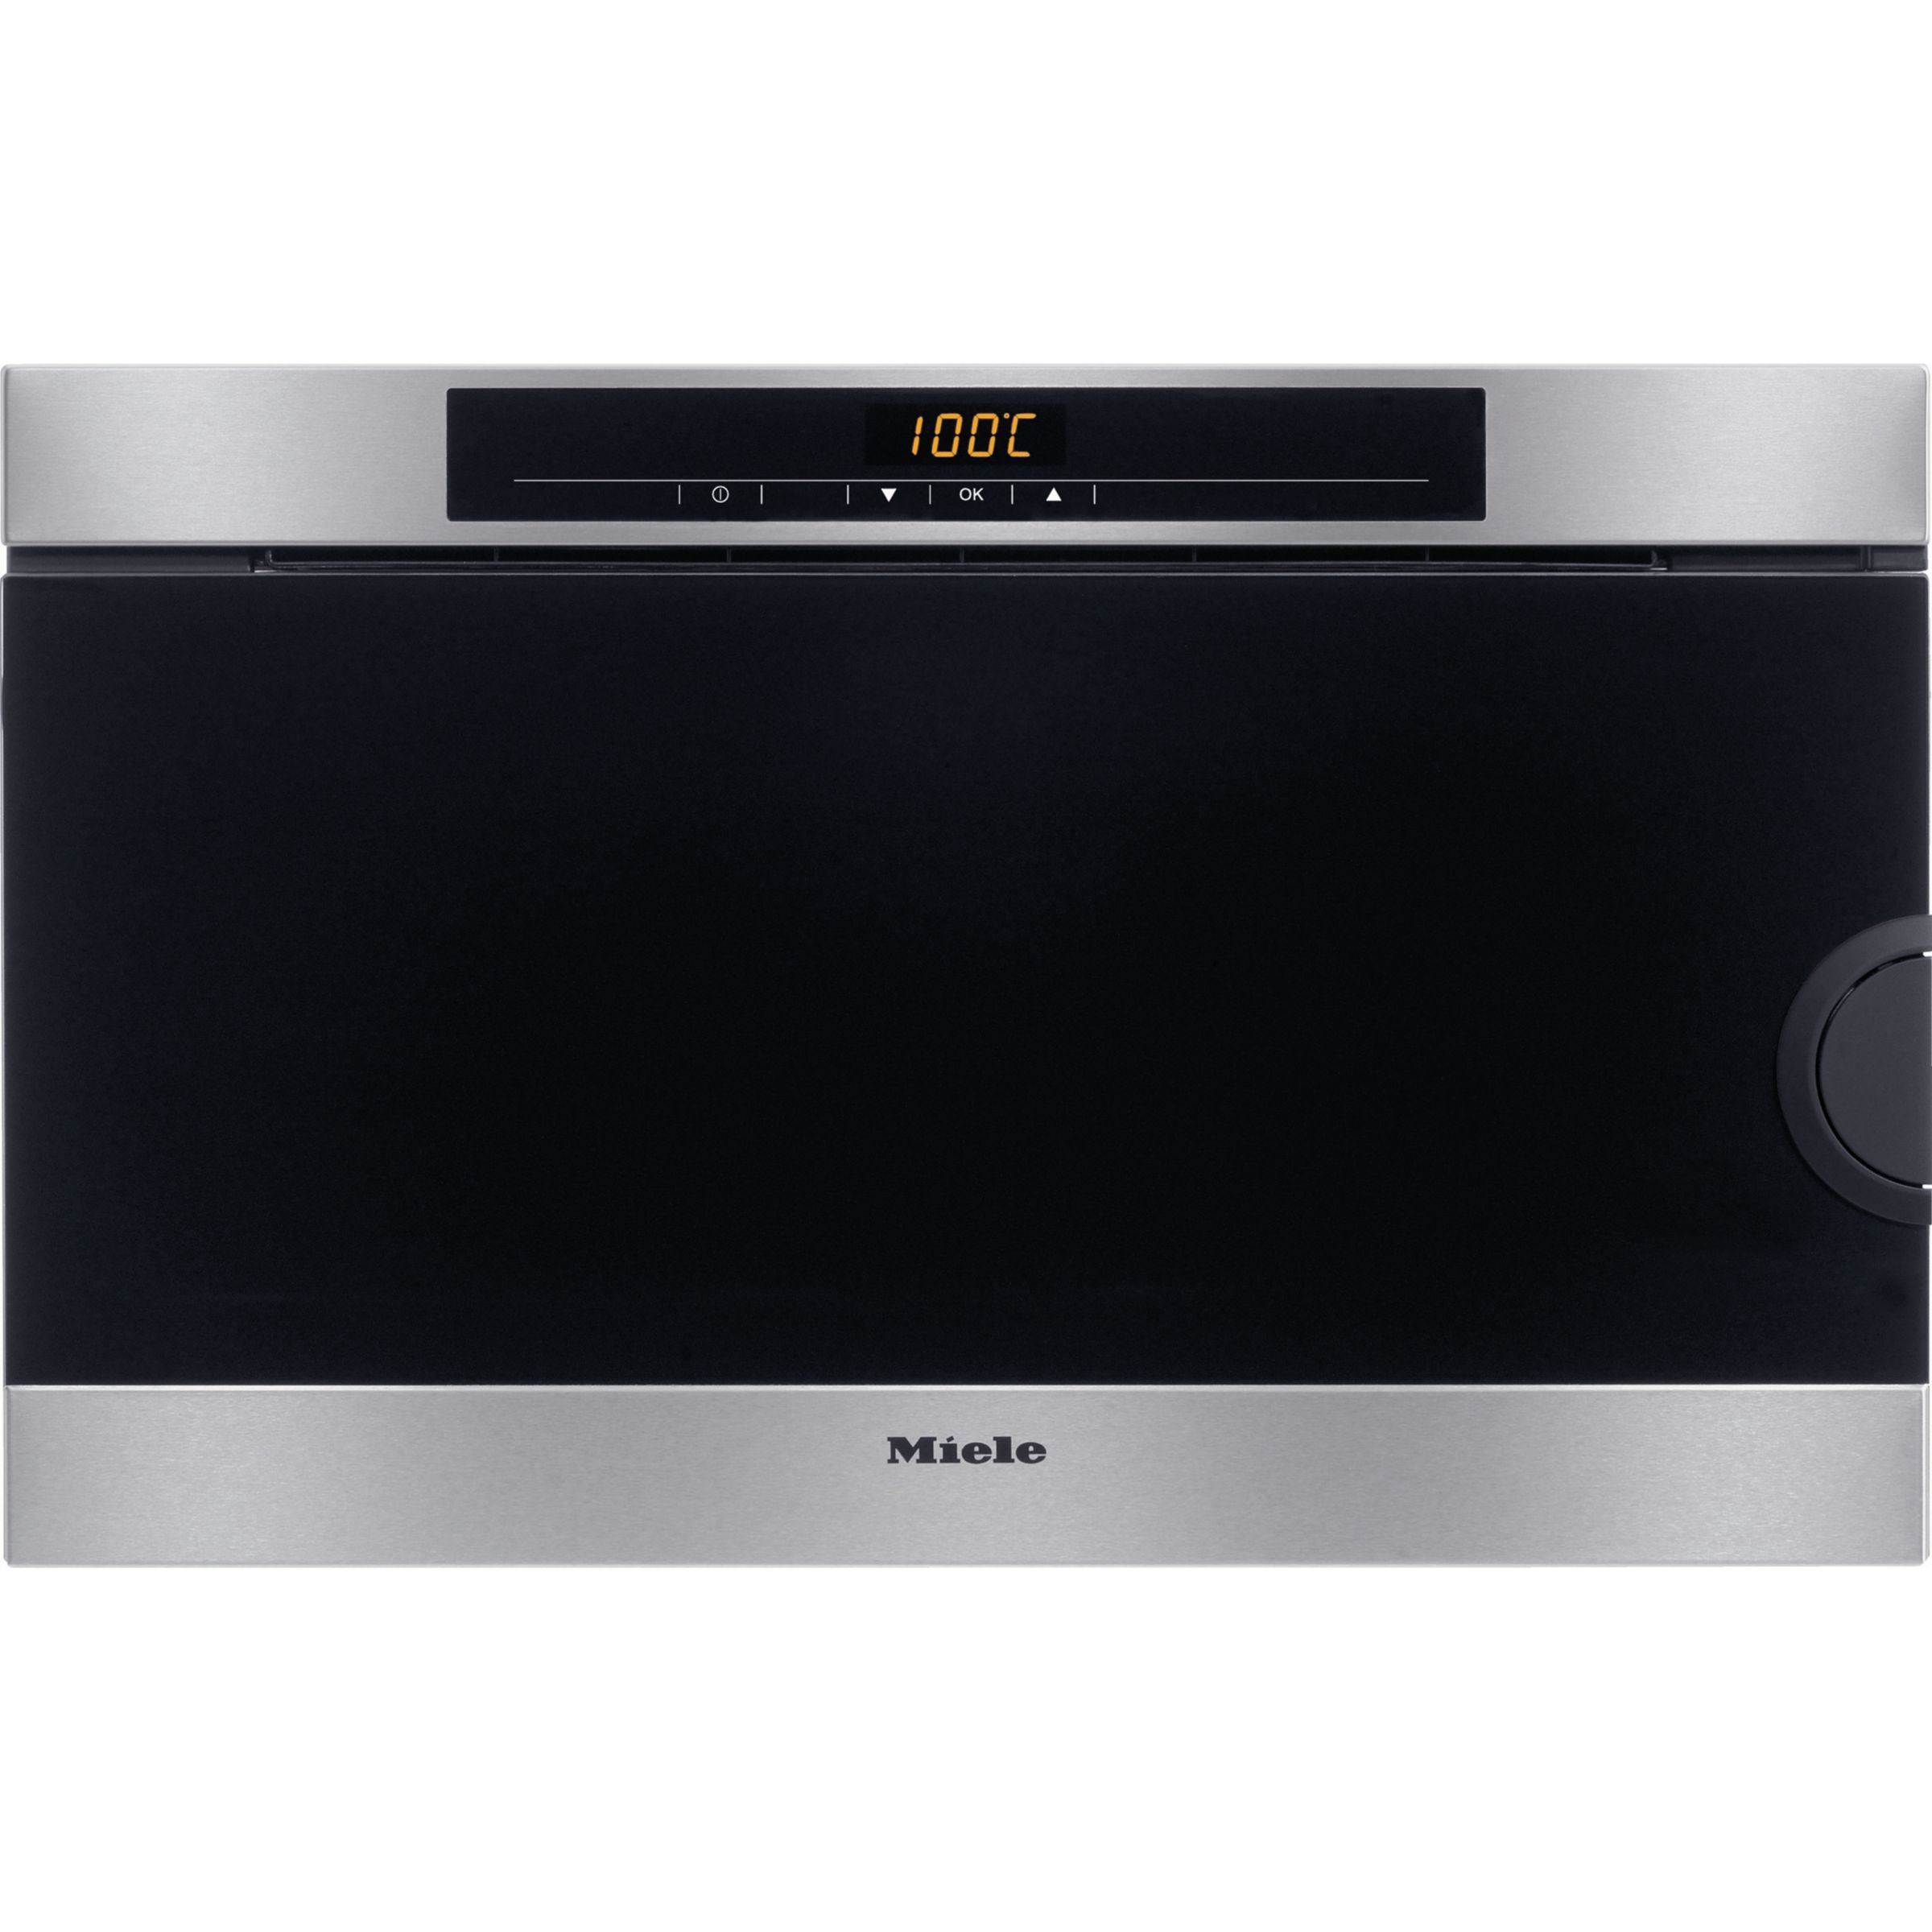 Miele DG3460 Single Electric Steam Oven, Stainless Steel at JohnLewis